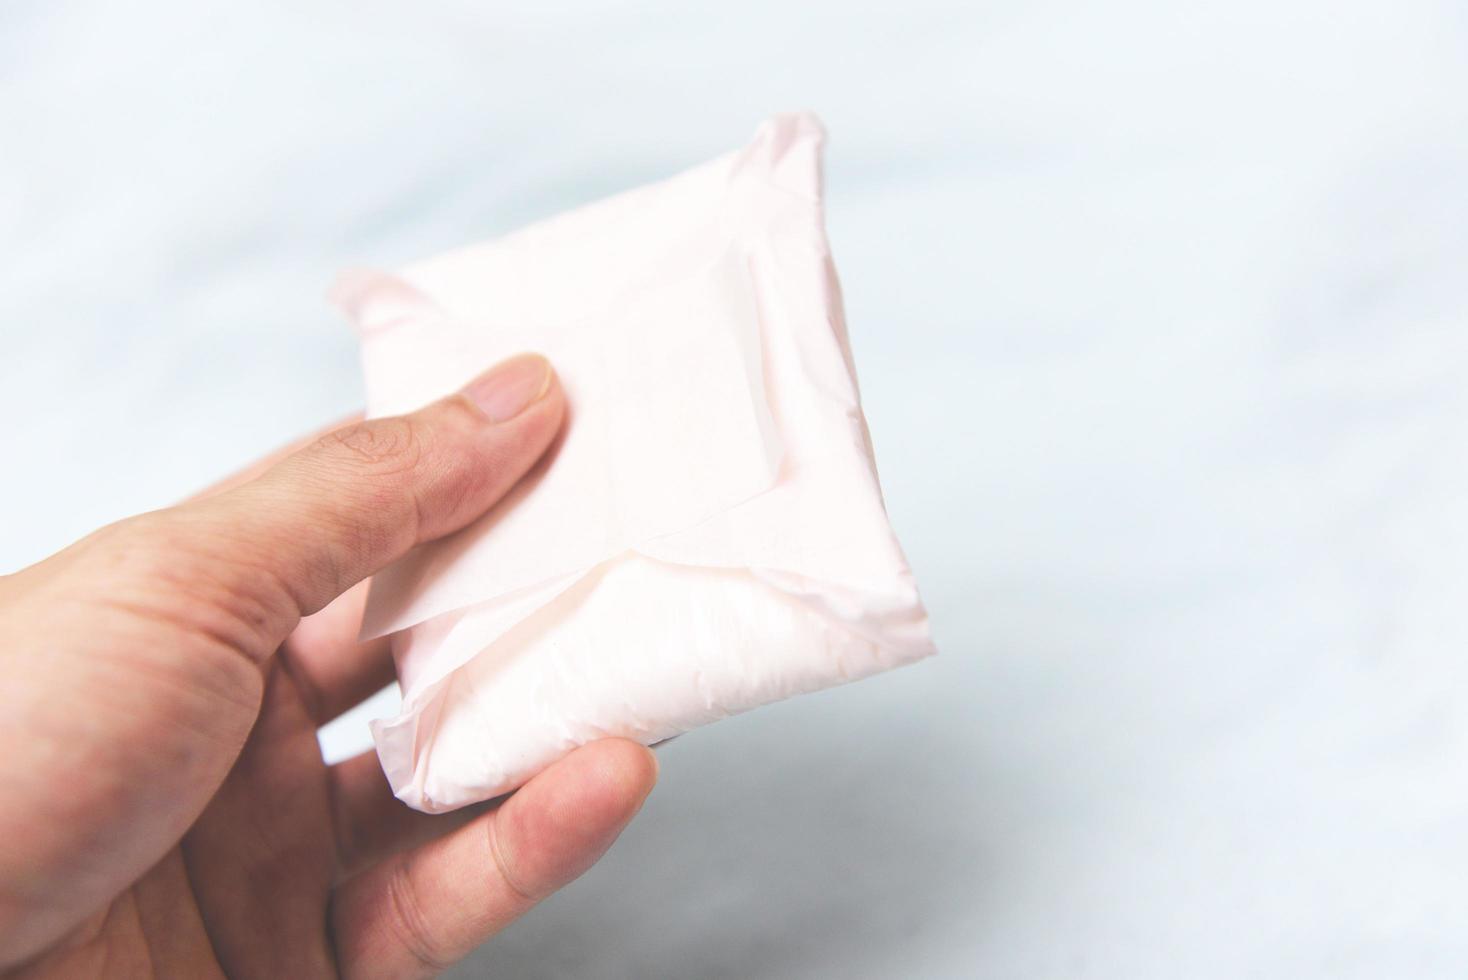 Holding Sanitary napkin or feminine sanitary pad on hand - Female hygiene means women Period Product absorbent sheets photo